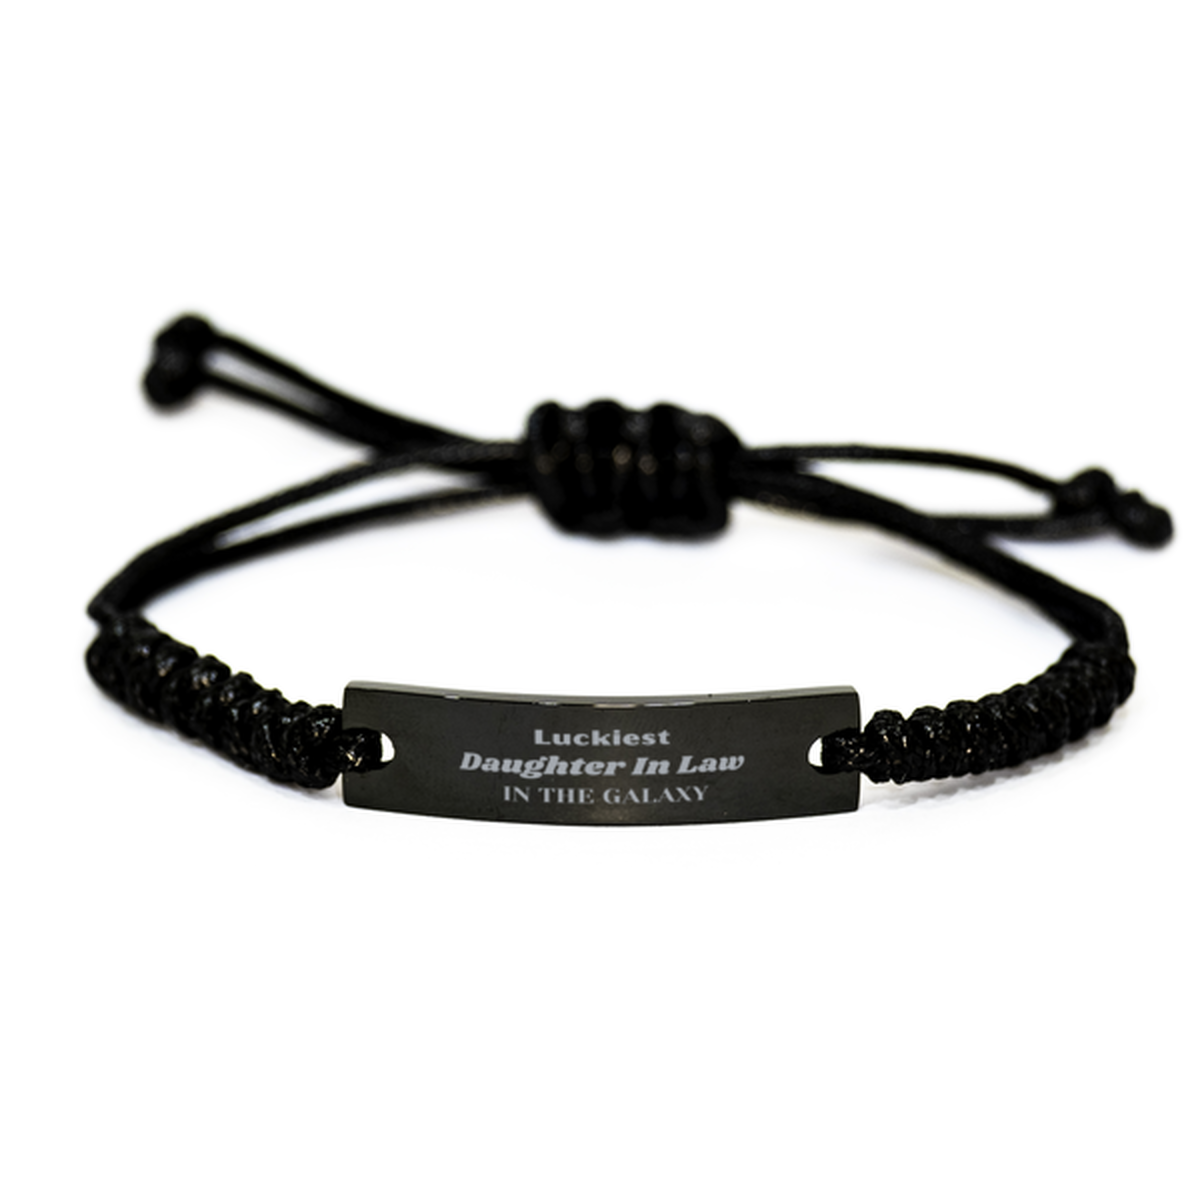 Luckiest Daughter In Law in the Galaxy, To My Daughter In Law Engraved Gifts, Christmas Daughter In Law Black Rope Bracelet Gifts, X-mas Birthday Unique Gifts For Daughter In Law Men Women